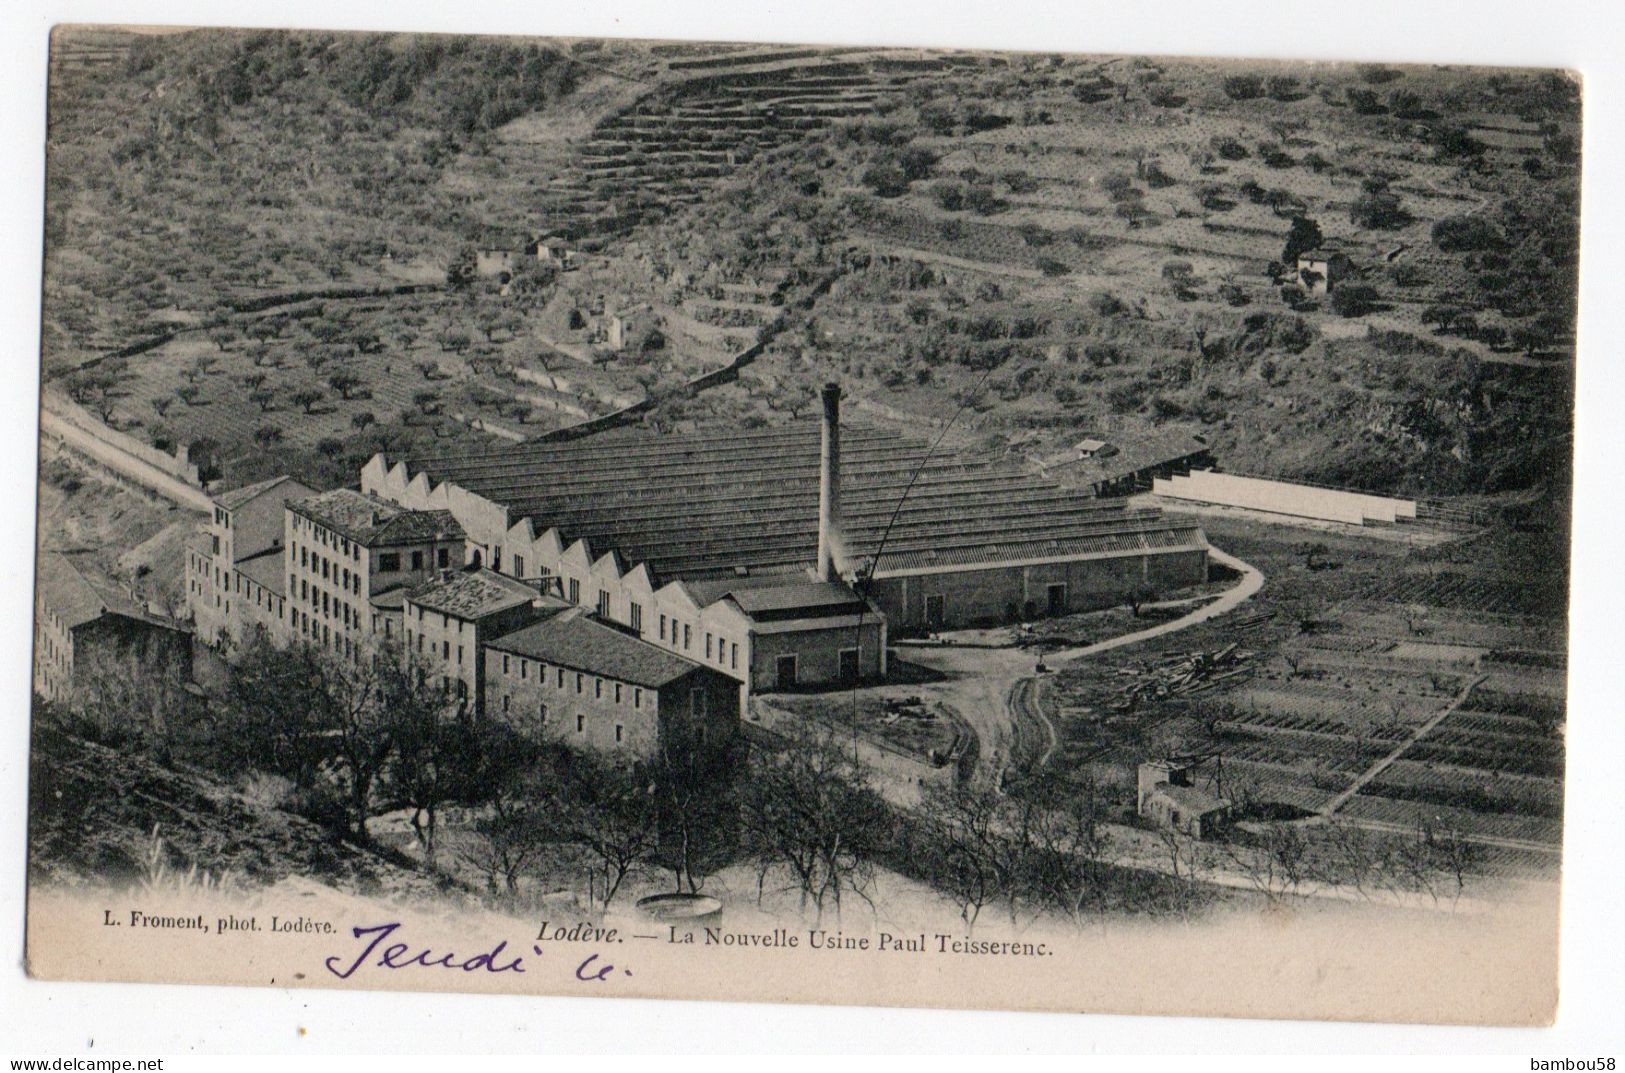 LODEVE * HERAULT * LA NOUVELLE USINE PAUL TEISSERENC * CHEMINEE * Phot. Froment - Lodeve